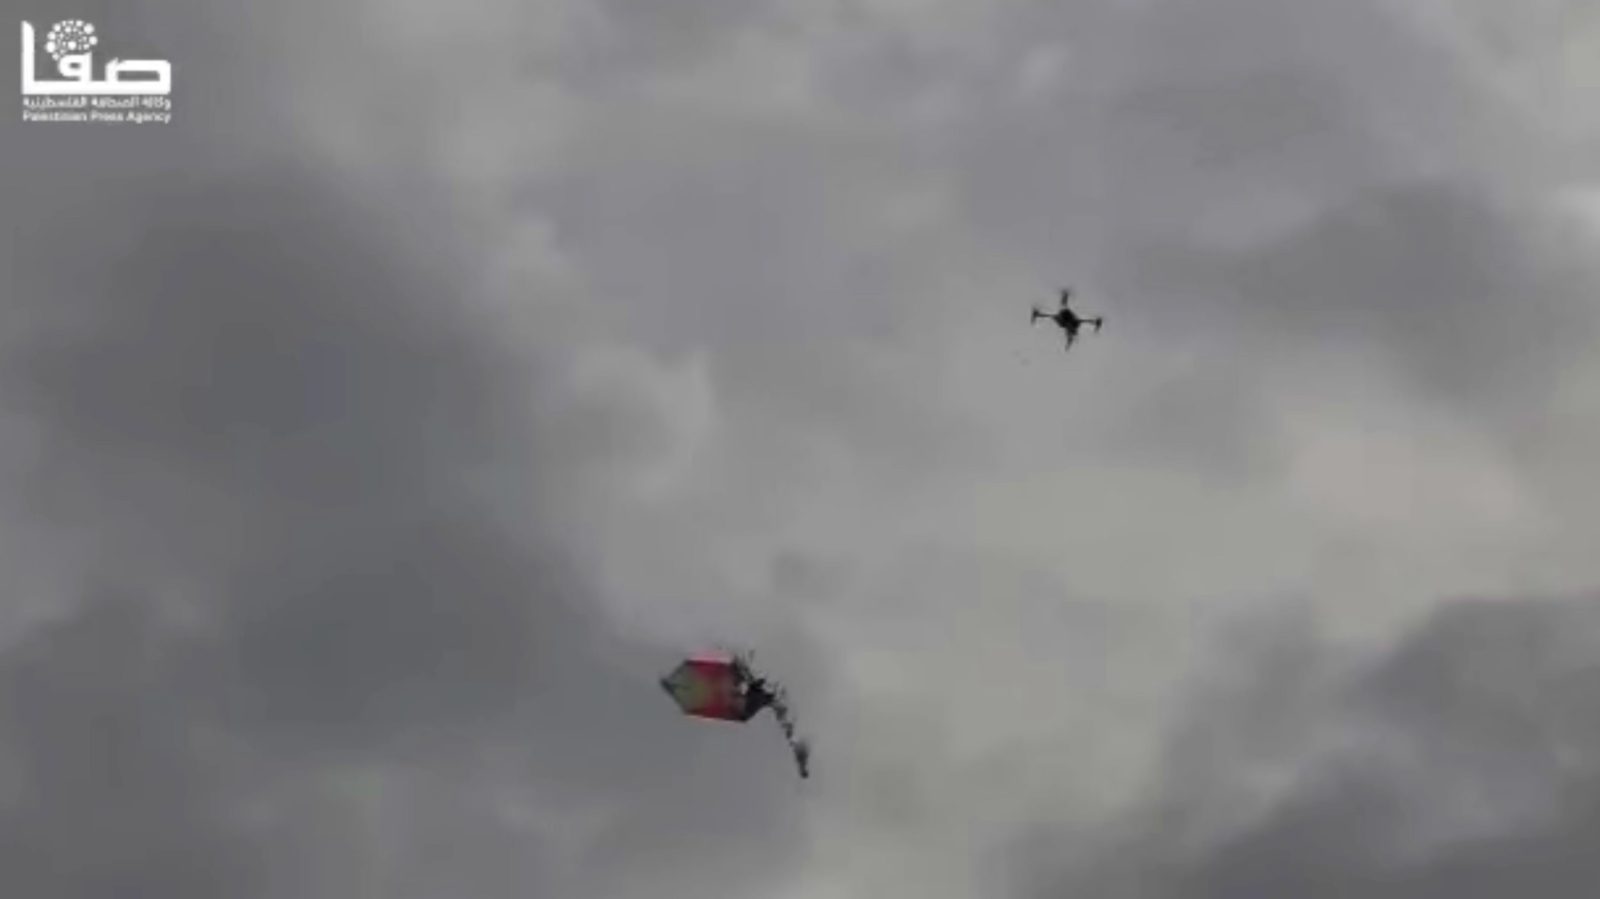 Israel uses amateur drone racers to take down 'kite bombs' from Gaza